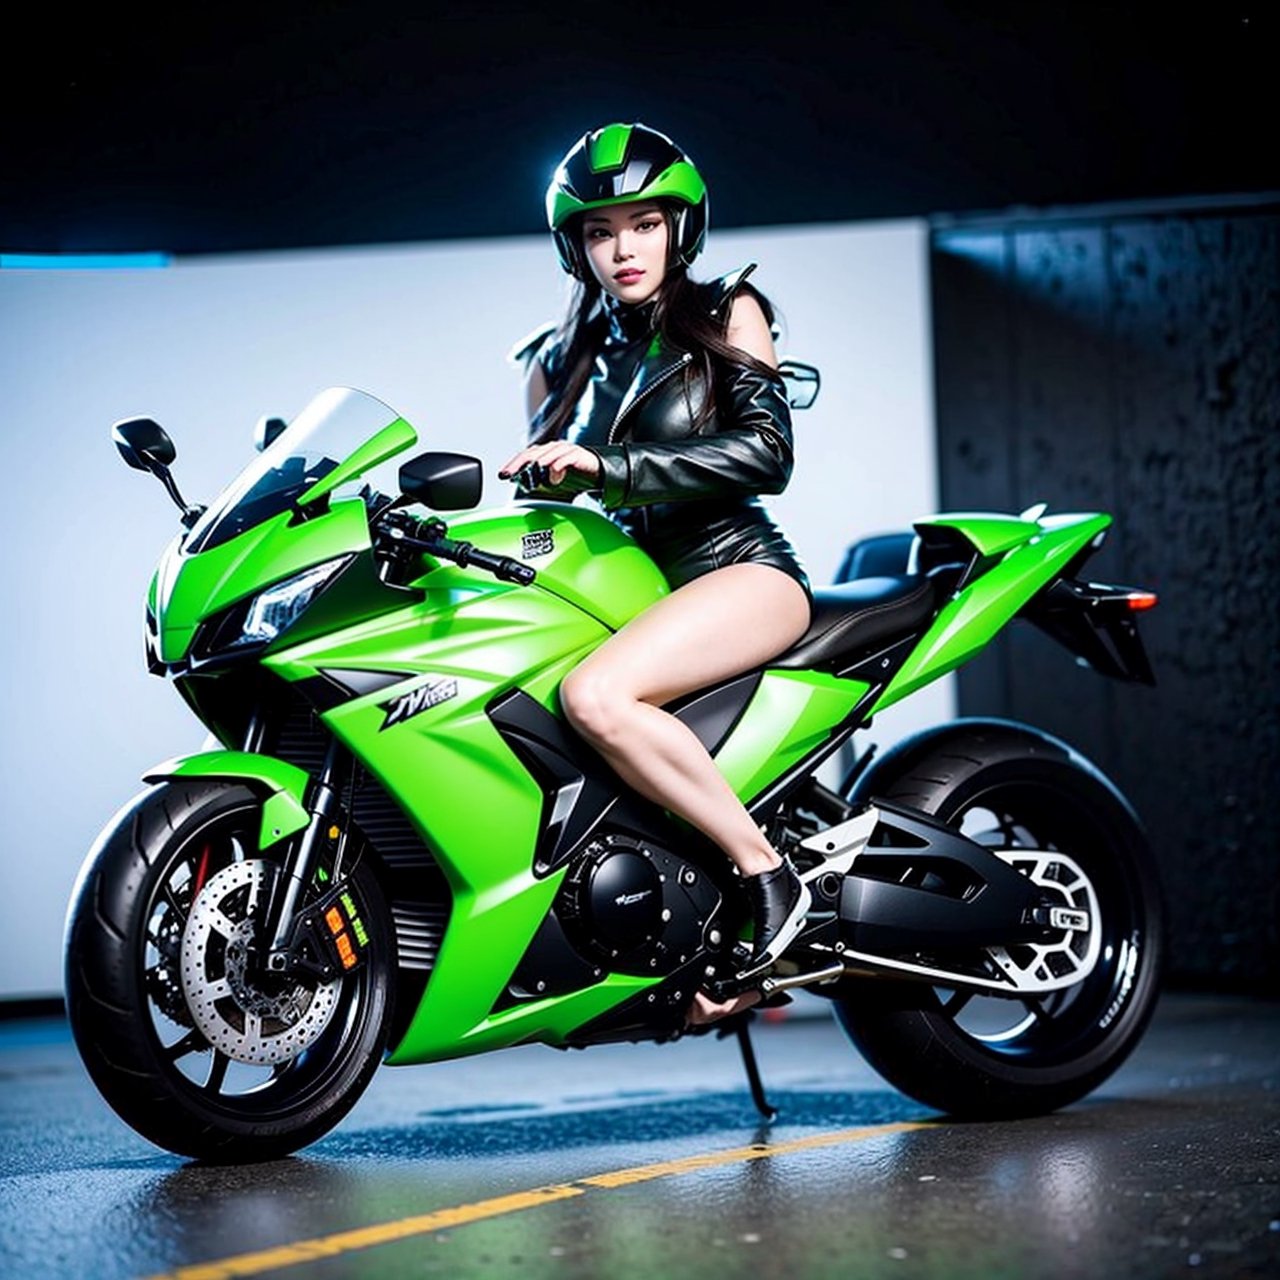 Highest image quality, outstanding details, ultra-high resolution, (realism: 1.4), the best illustration, favor details, highly condensed 1girl, with a delicate and beautiful face, dressed in a black and green mecha, wearing a mecha helmet, holding a directional controller, riding on a motorcycle, the background is a high-tech lighting scene of the future city. surreal illustration, surreal rendering, clean digital rendering, photo realistic rendering, surreal illustration